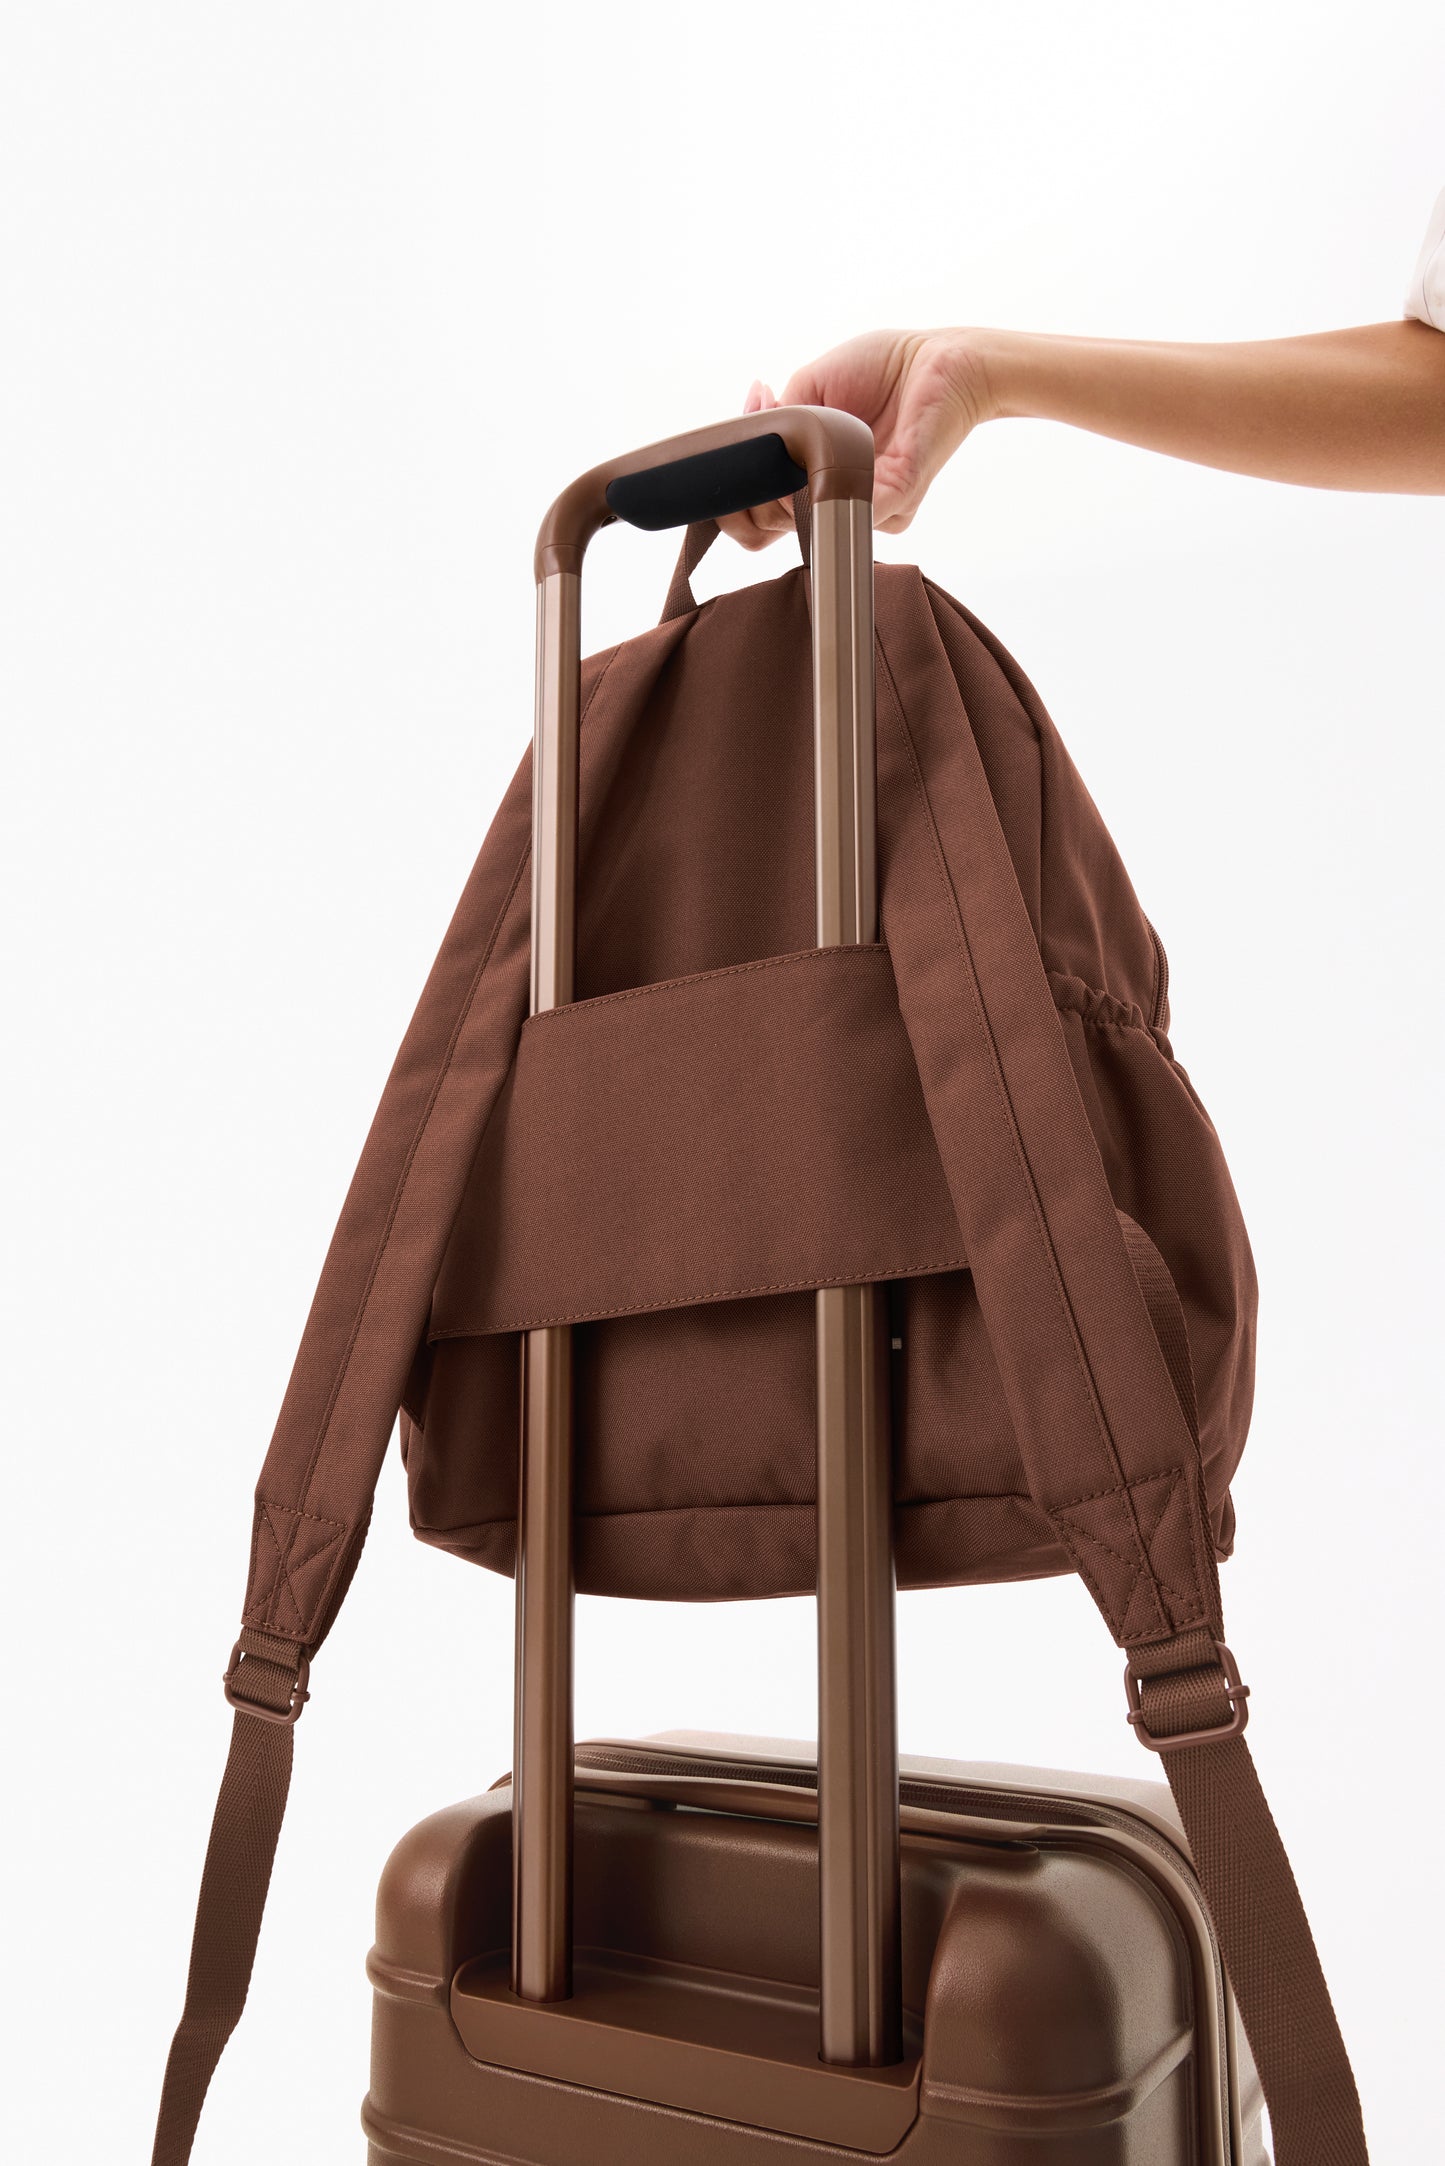 The BÉISics Backpack in Maple